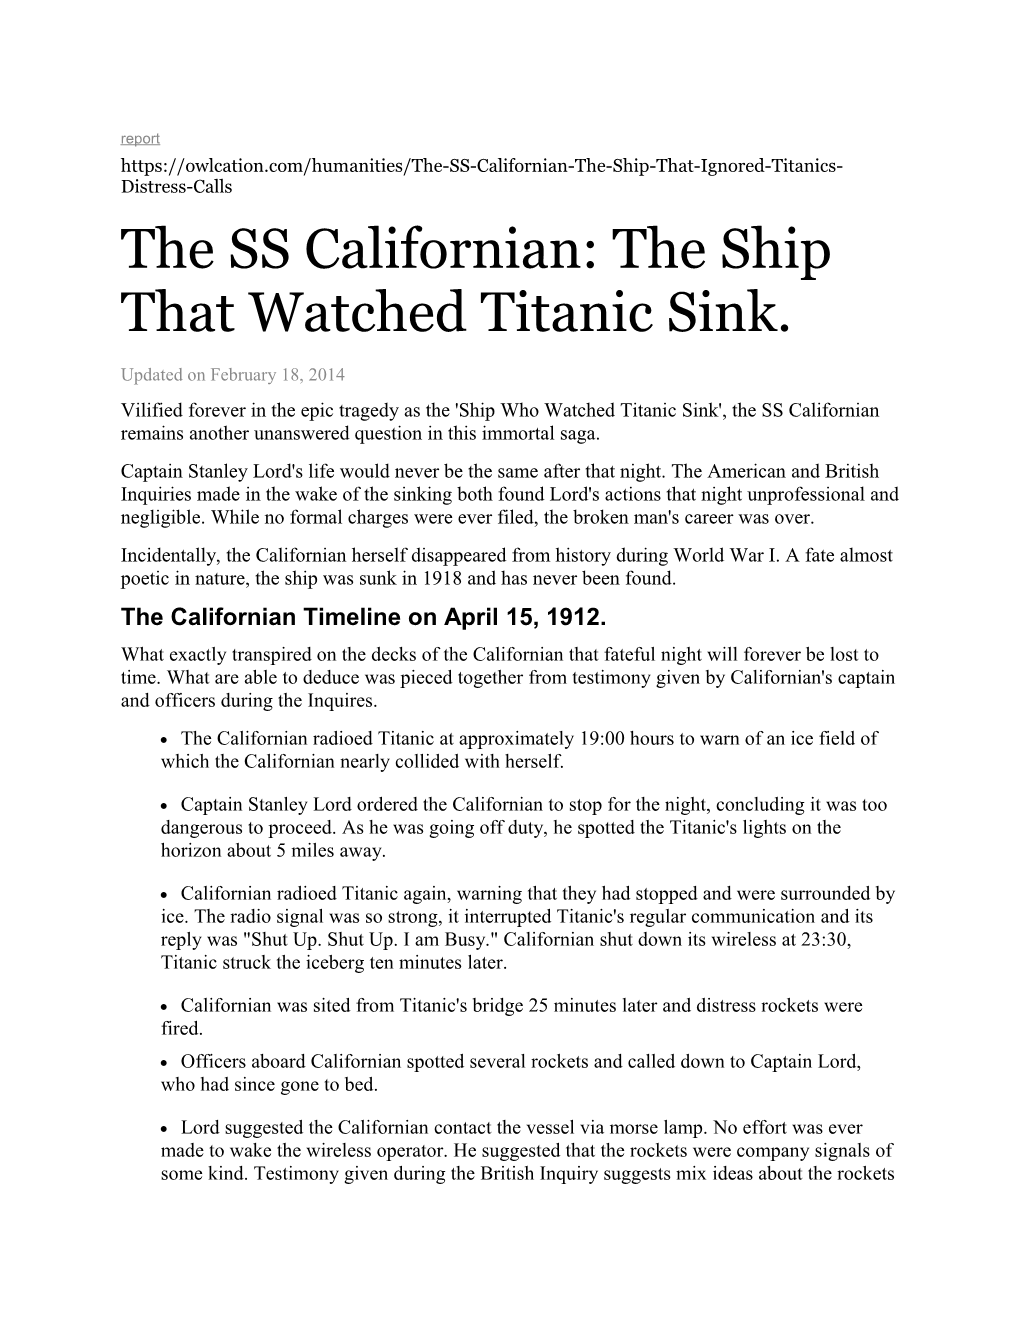 The SS Californian: the Ship That Watched Titanic Sink